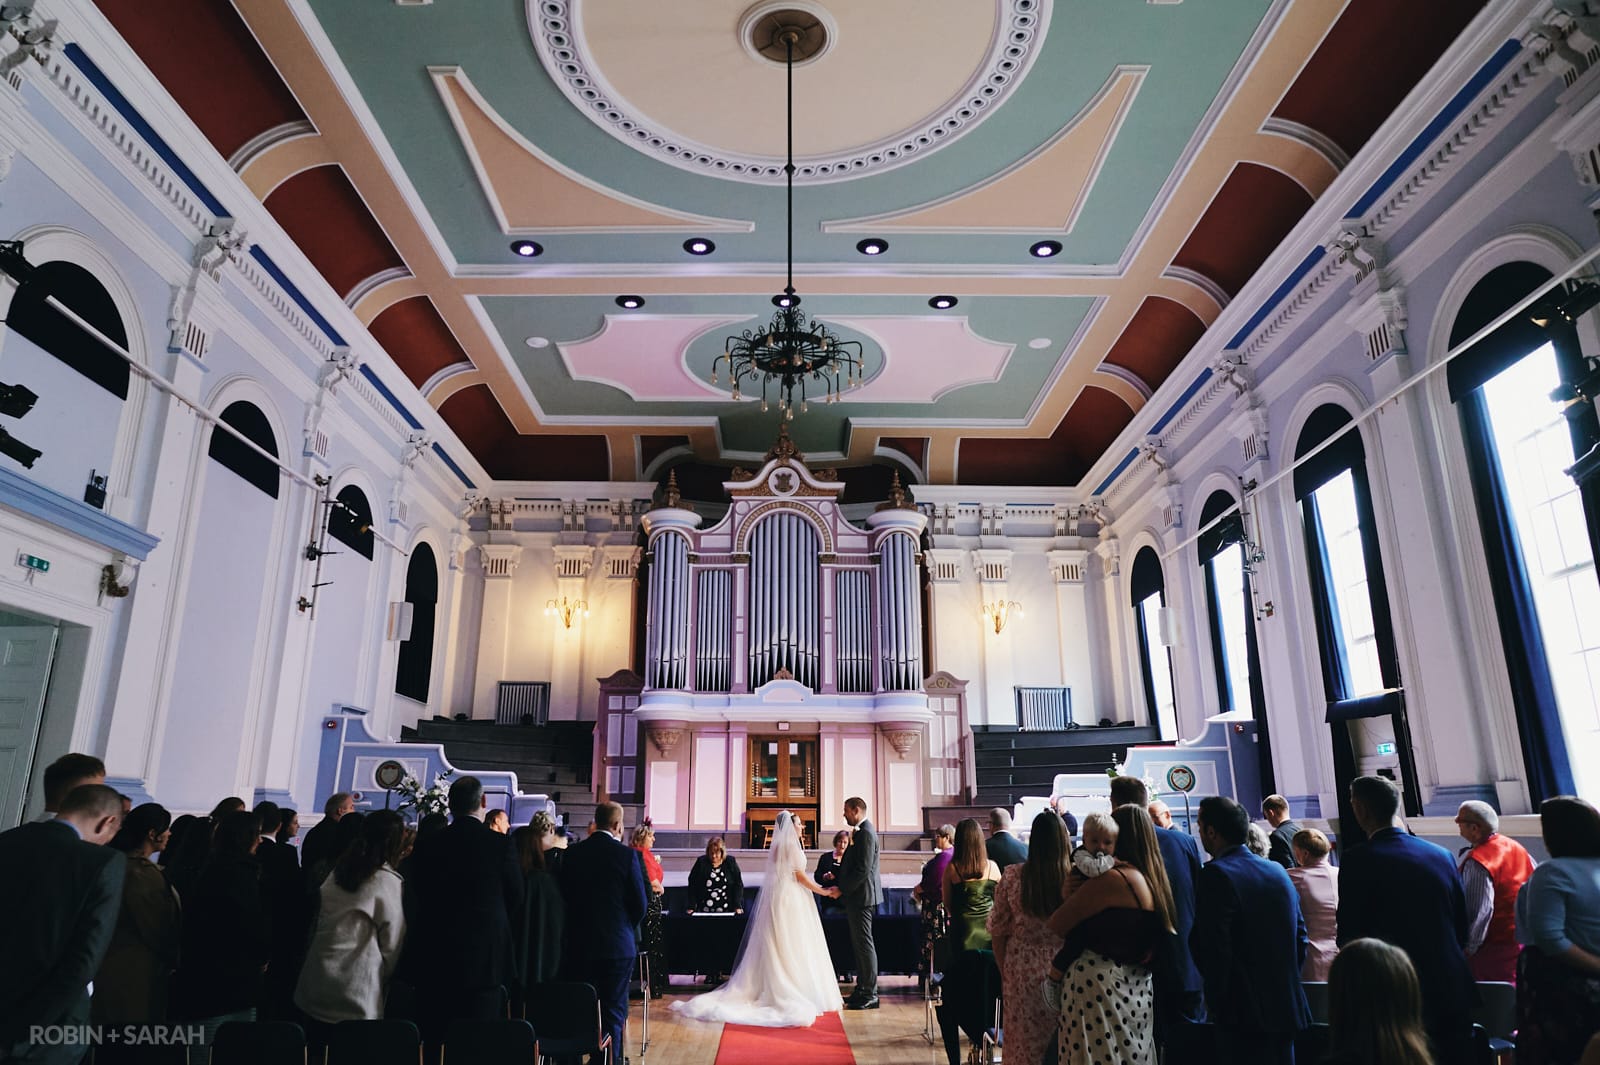 Bride and groom exchange wedding vows in beautiful old town hall